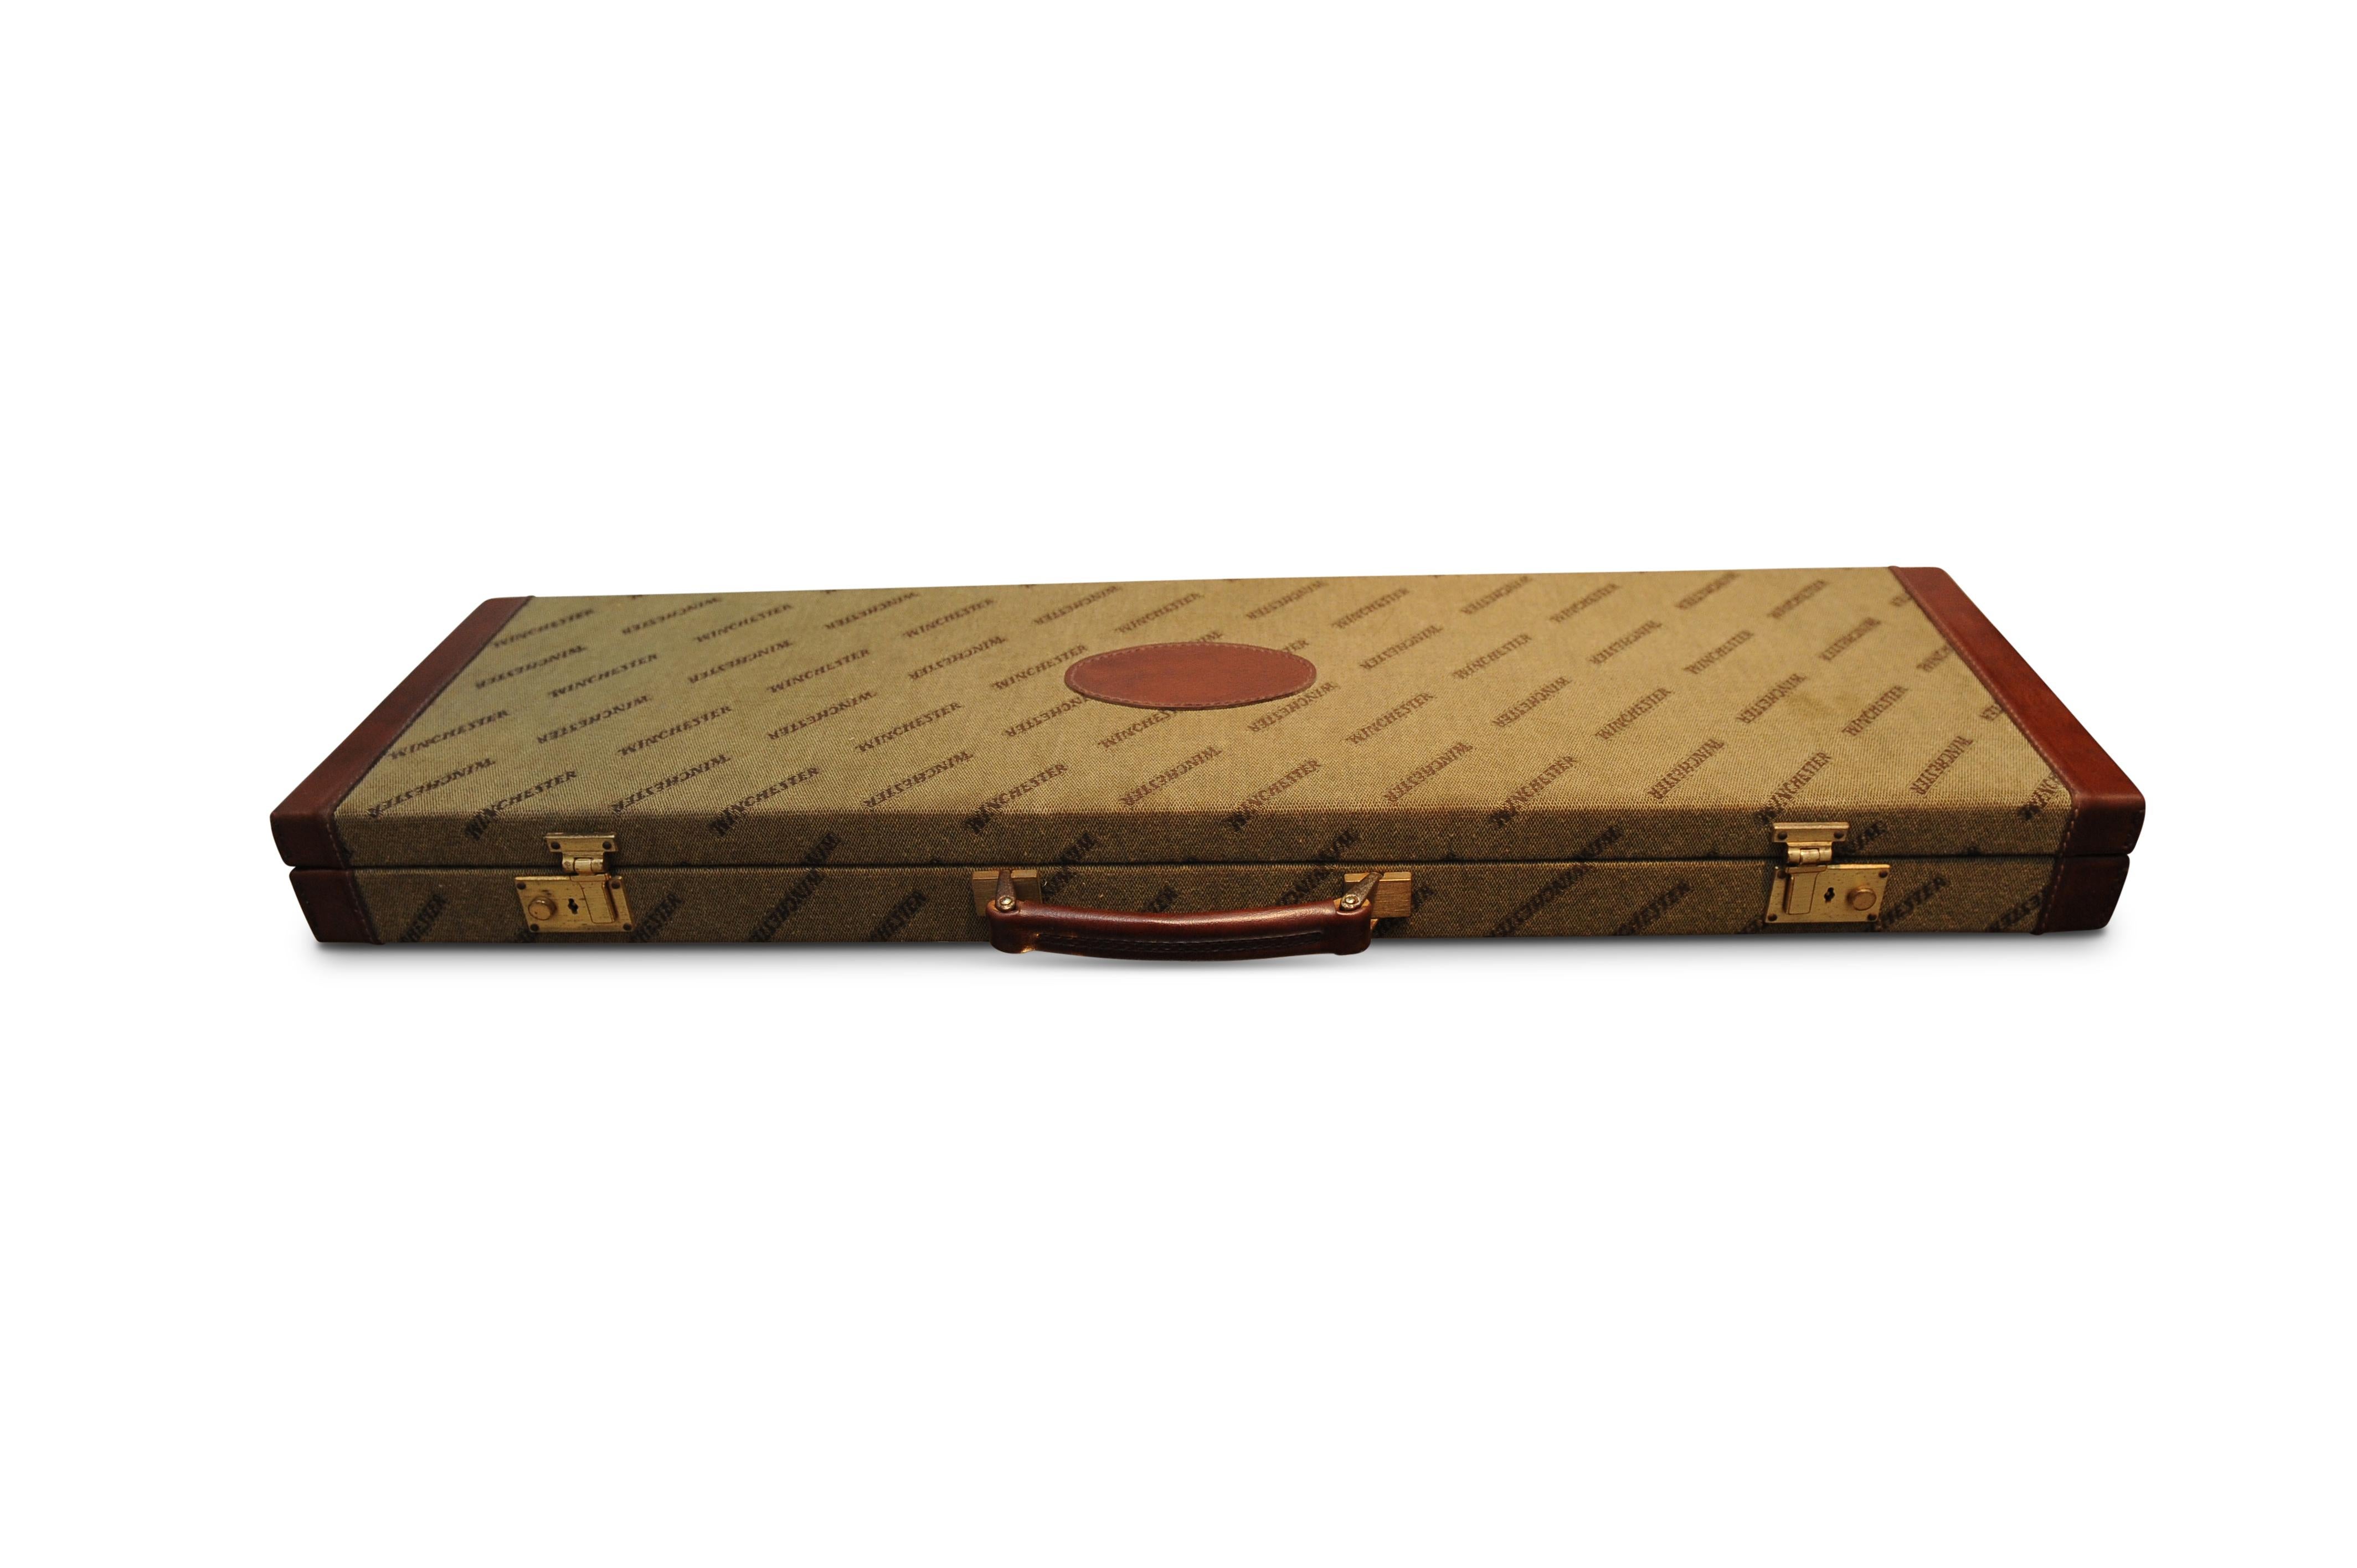 Winchester single shotgun case with red inner lining, leather trim and brass locks.

Winchester hard gun case for Winchester 23, 101 or 21, will take 28 inch barrels, leather trim, will take other brands of sxs and over under

The case is in